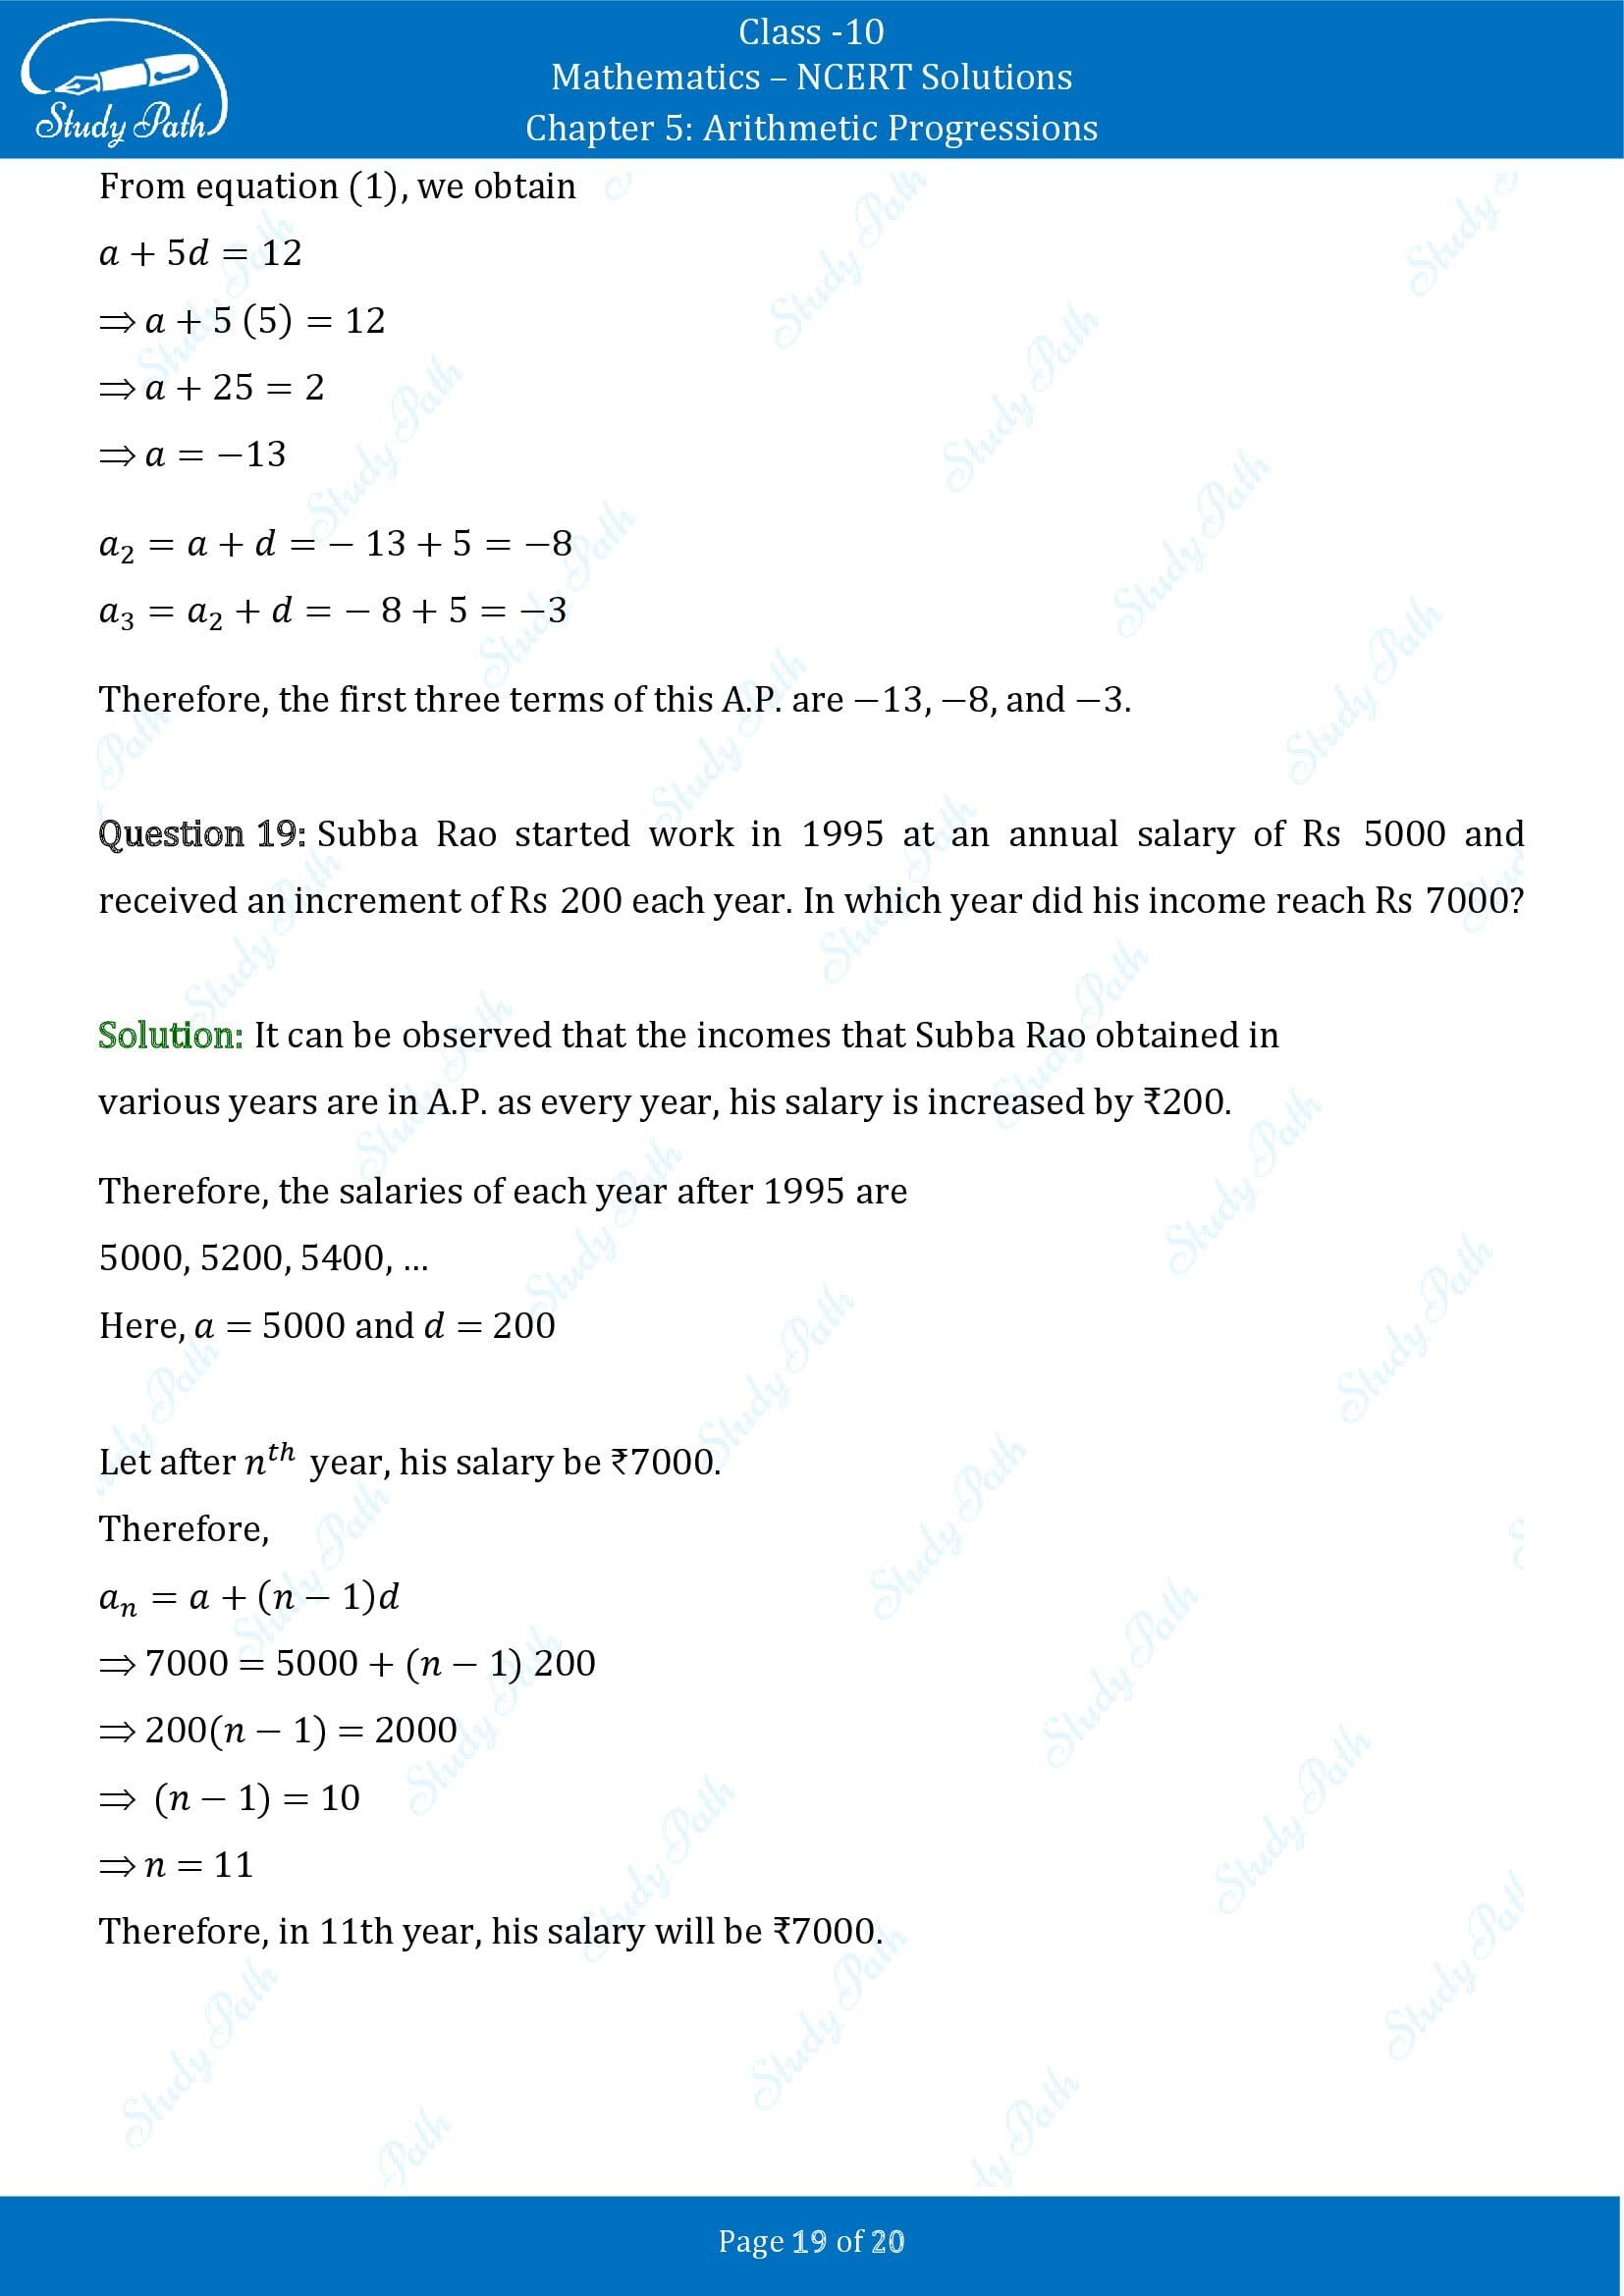 NCERT Solutions for Class 10 Maths Chapter 5 Arithmetic Progressions Exercise 5.2 00019